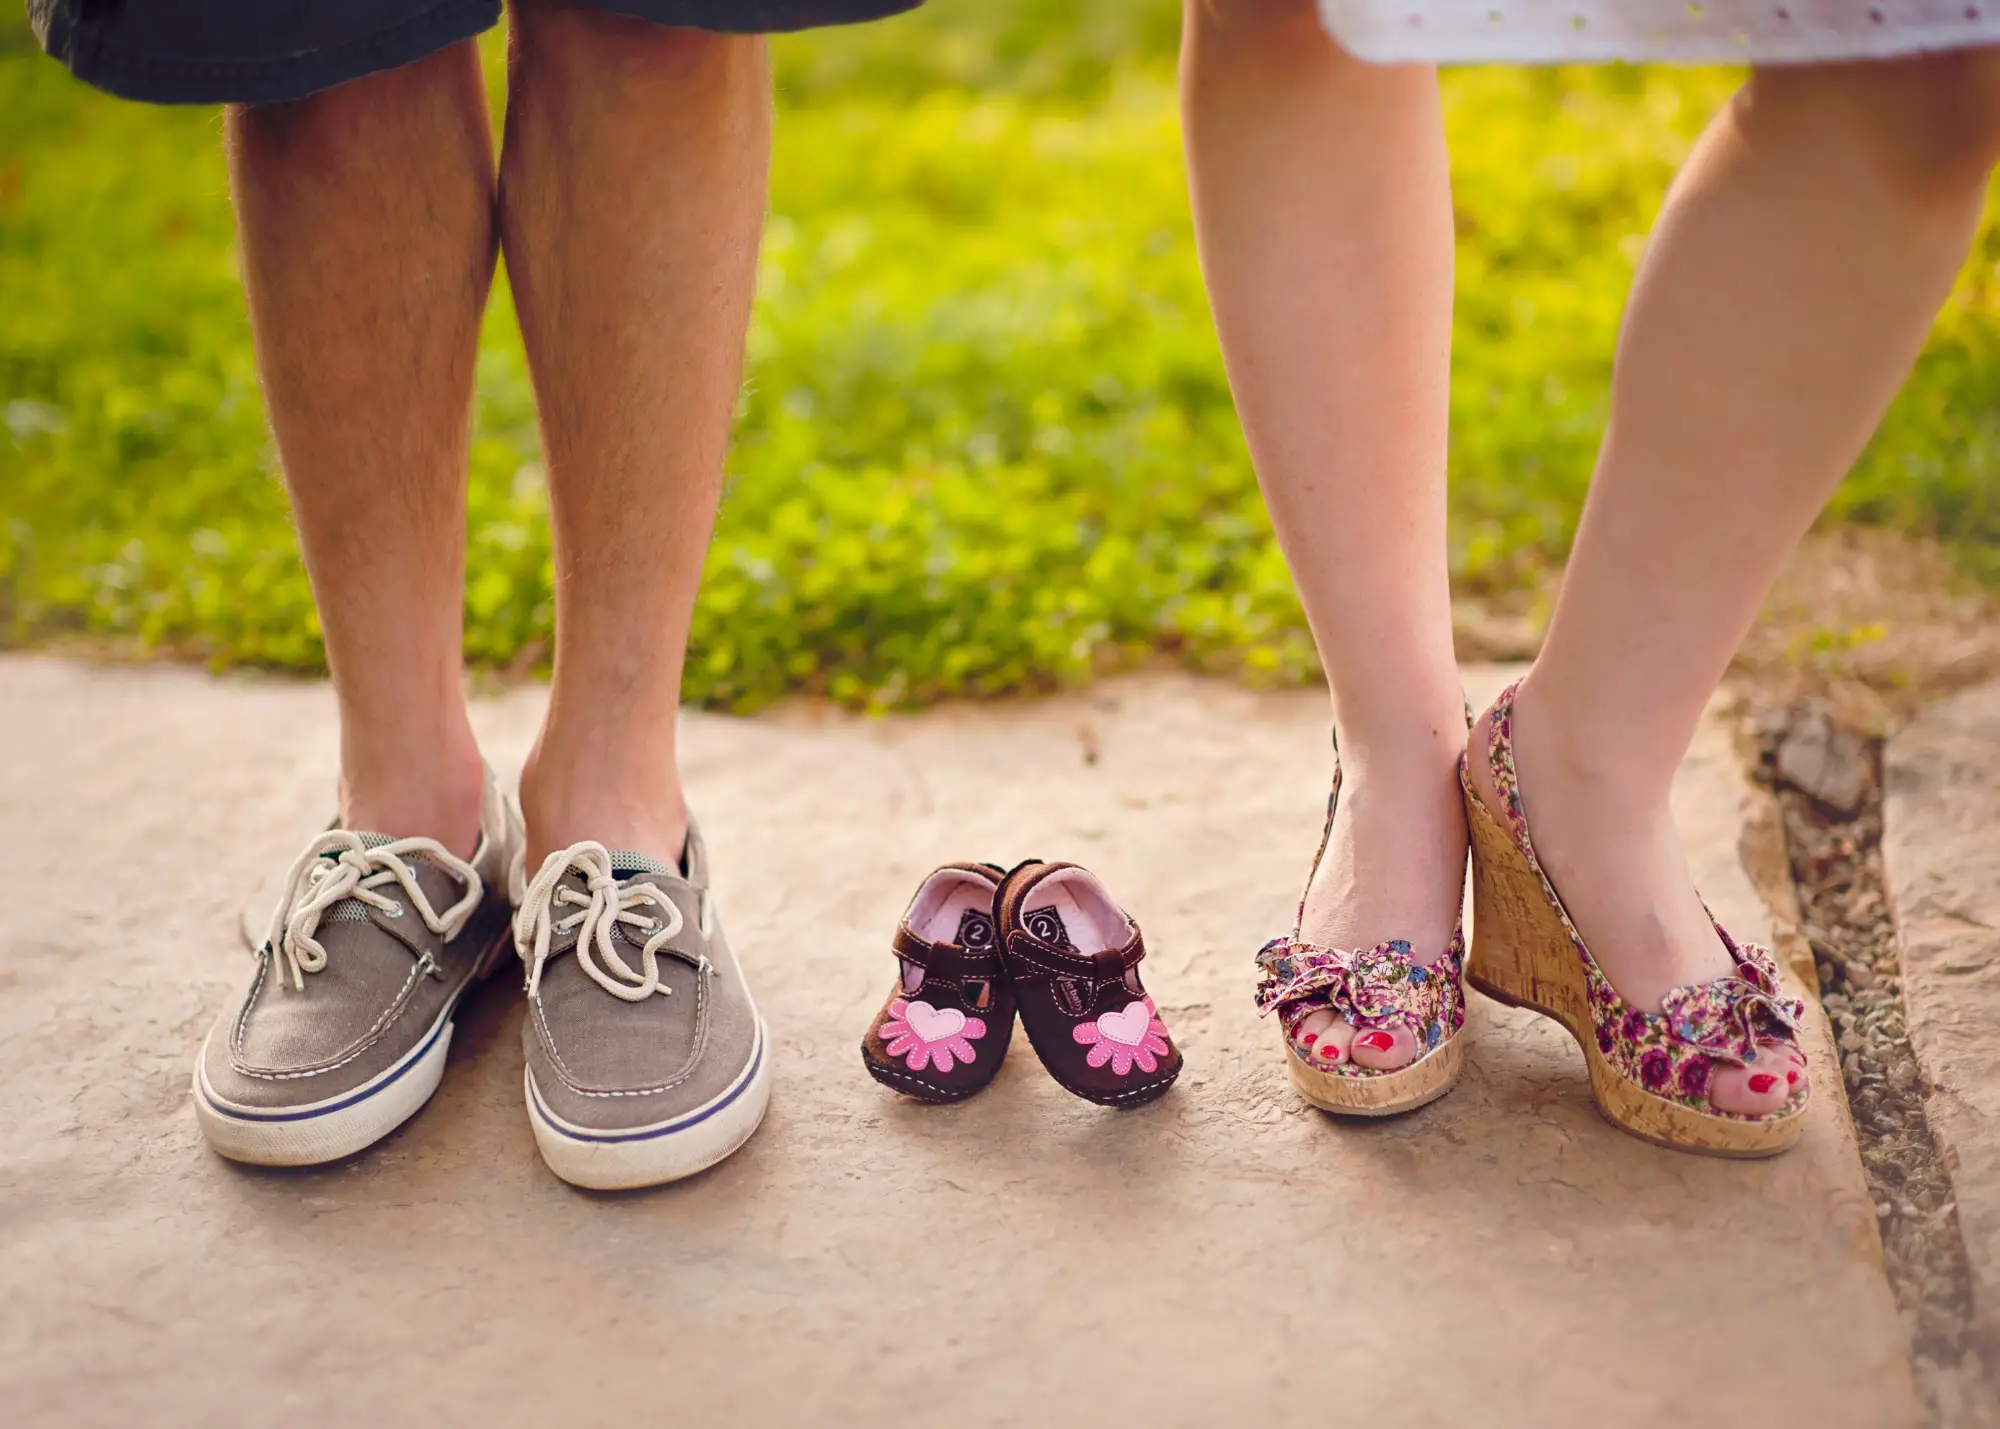 photo of new dad and mom and baby shoes as a sneaky way to announce pregnancy